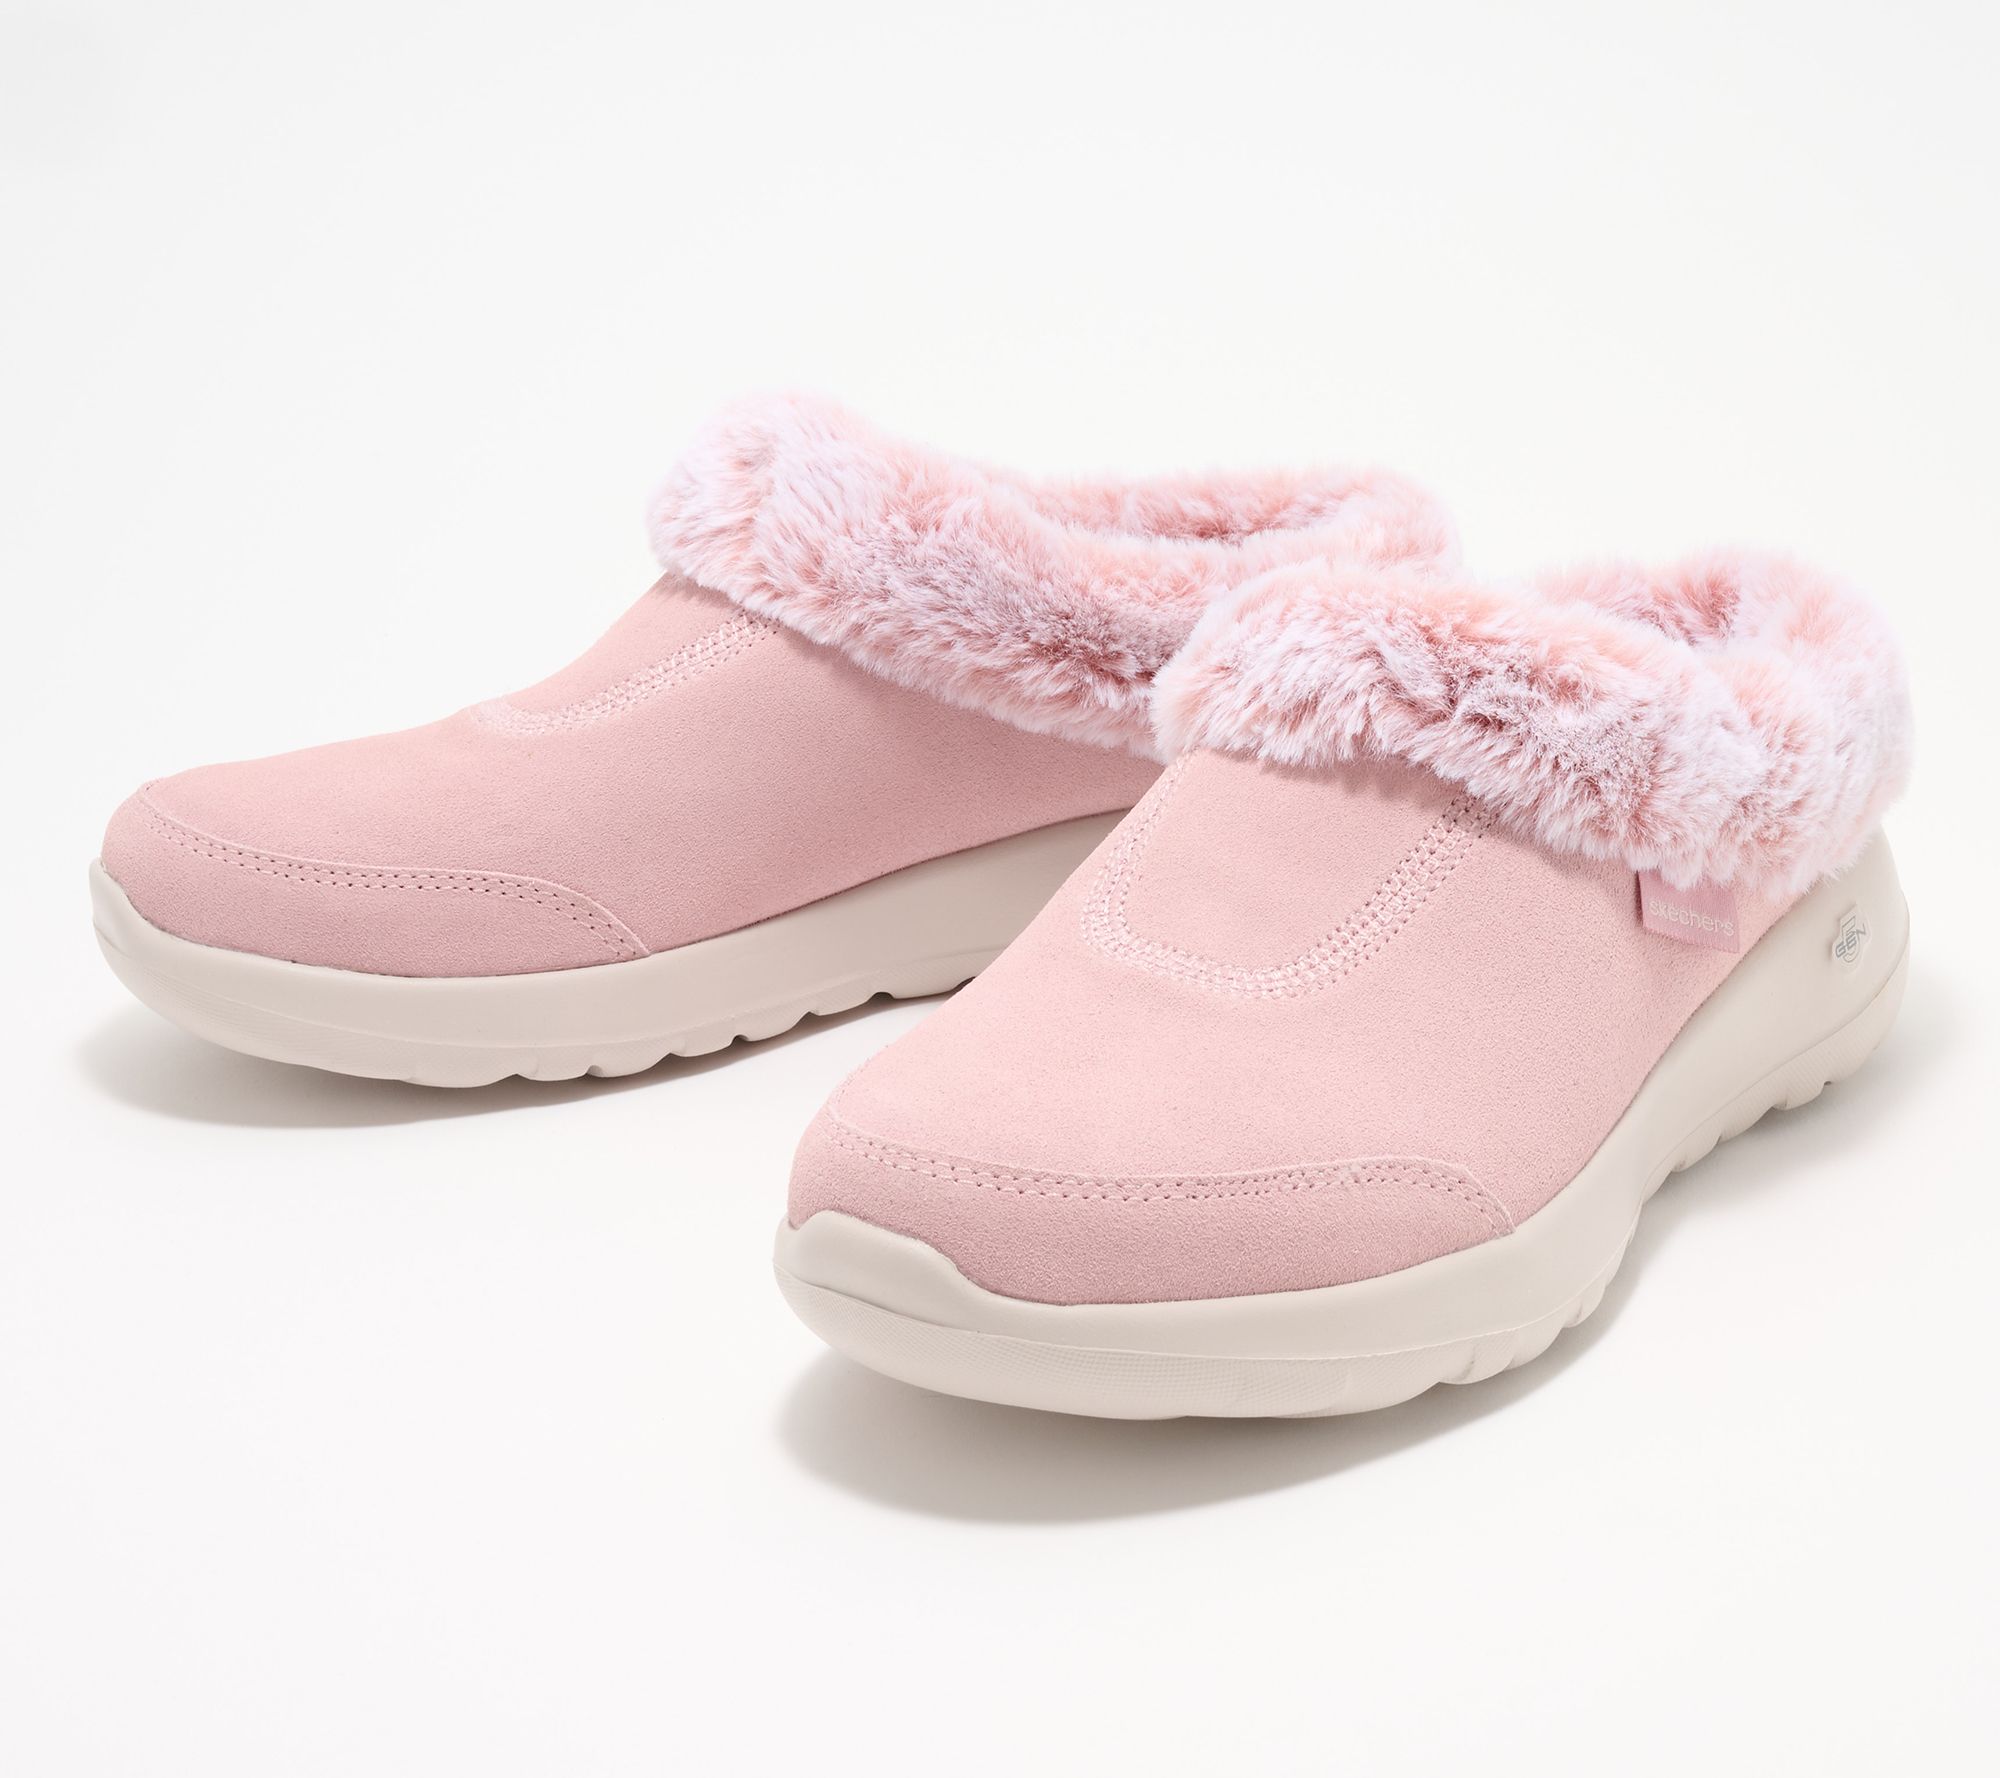 Skechers On-the-GO Joy Suede and Faux Fur Clogs Snuggled Up - QVC.com